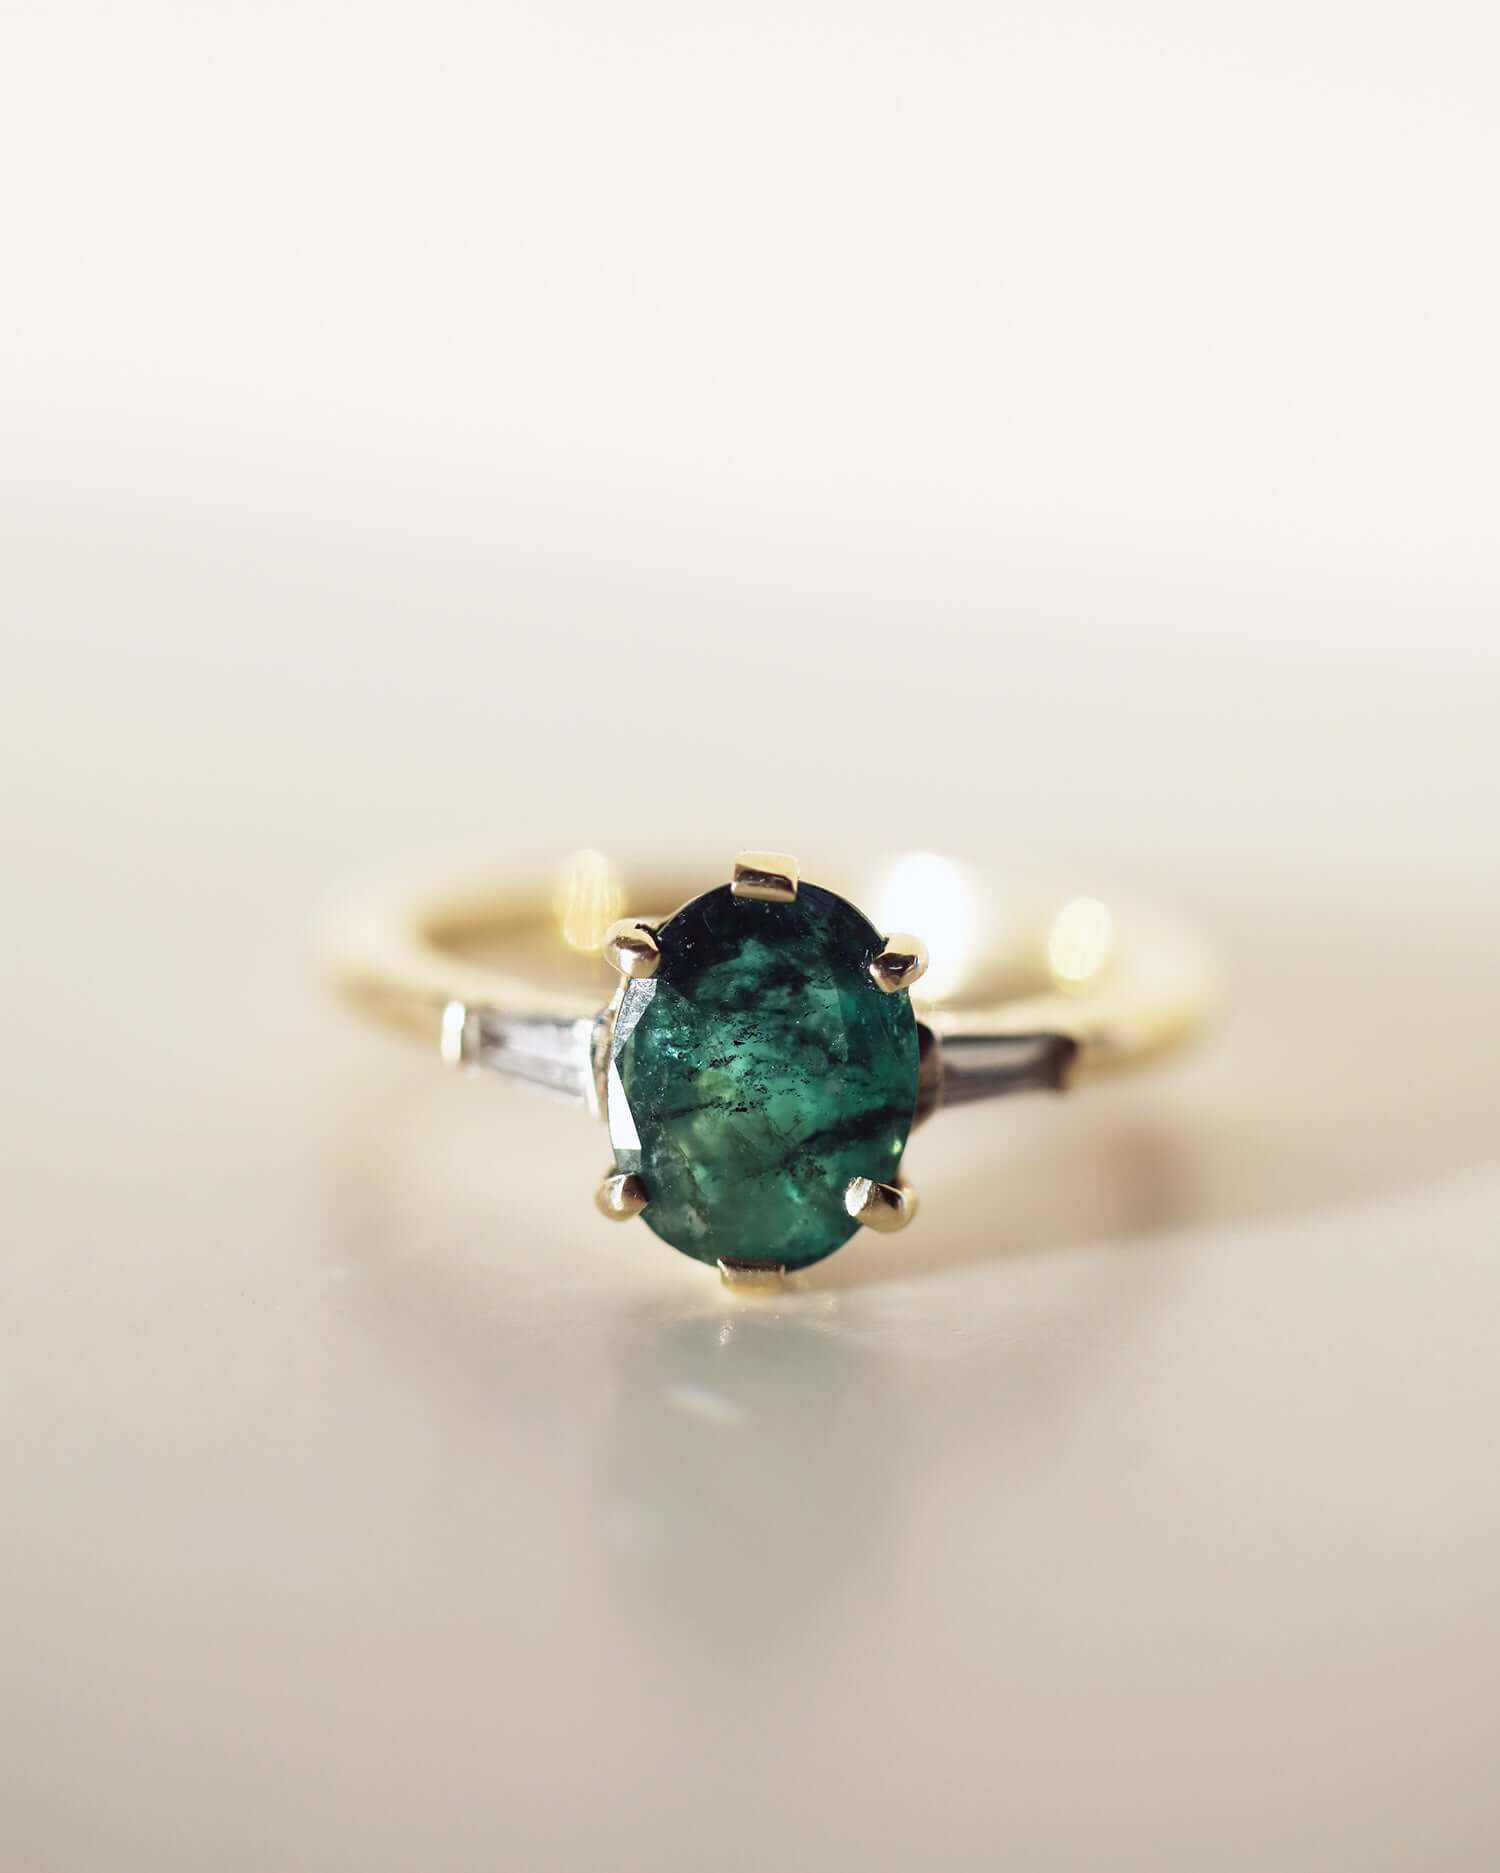 Oval Emerald engagement ring set in gold, by Macha Studio, Brooklyn NYC